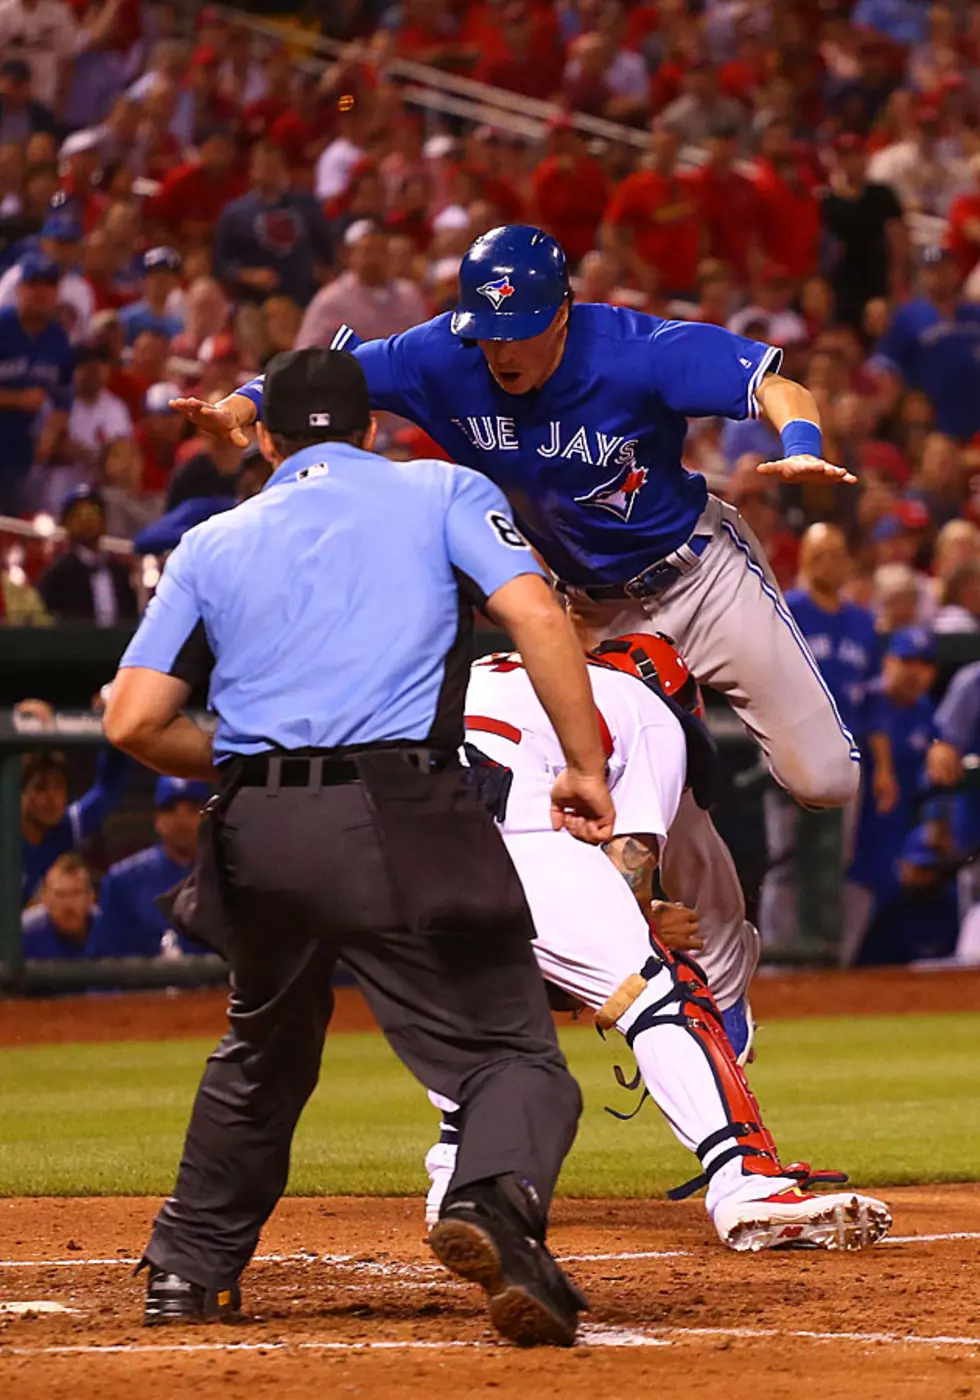 Chris Coghlan&#8217;s Acrobatic Dive Over Catcher Into Home Is the Slide of the Year